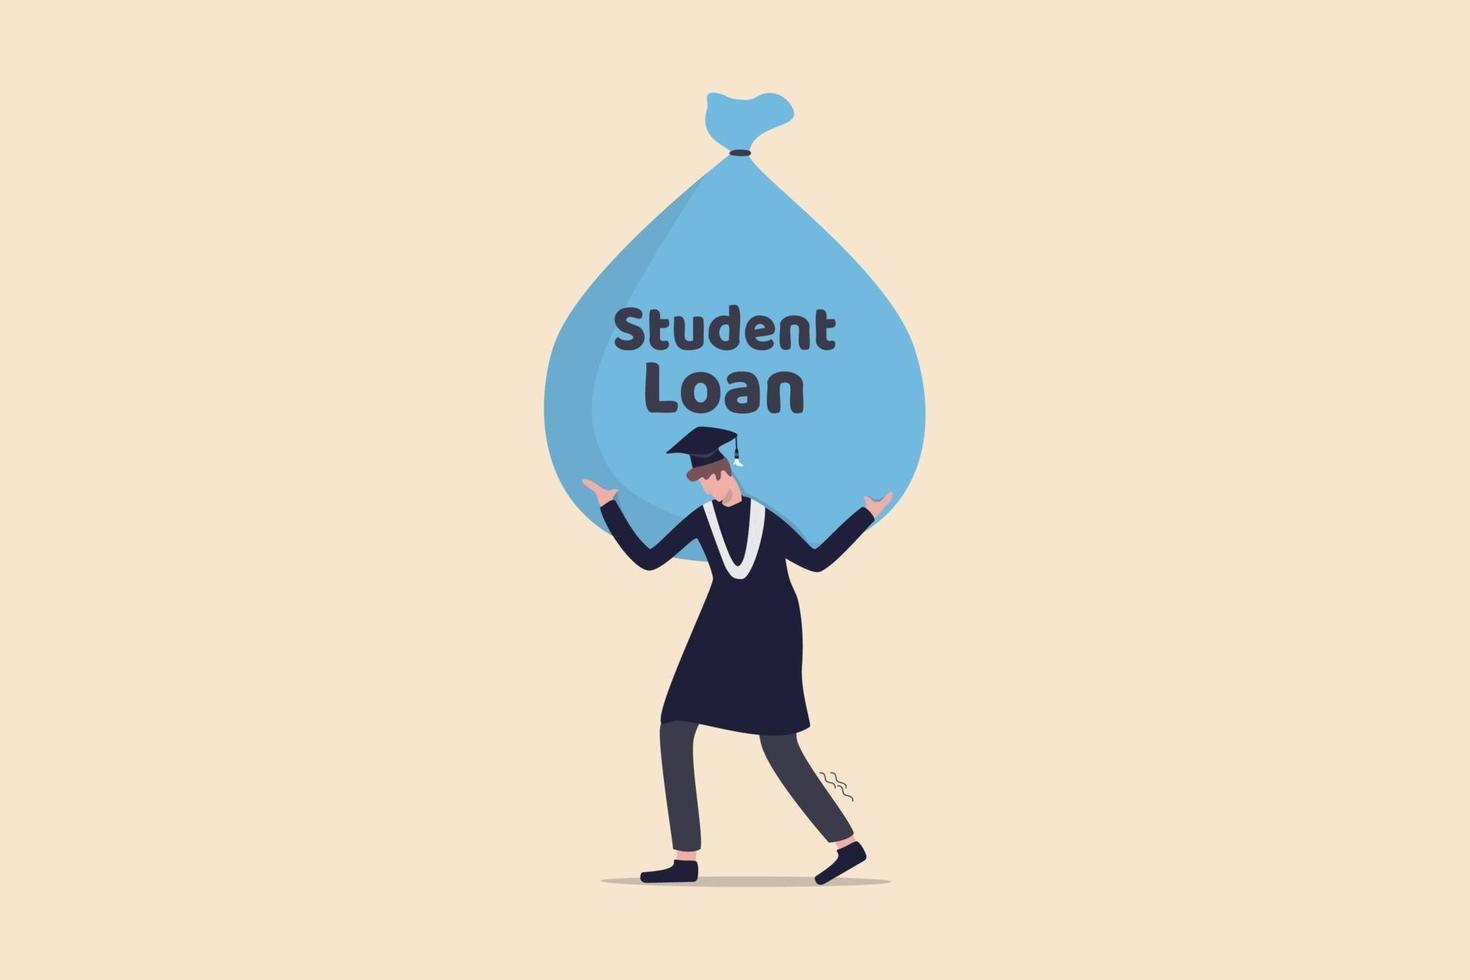 Student loan, saving for school, university or college study cost concept, graduated student wearing graduation ceremony suit holding heavy expensive student loan money bag. vector